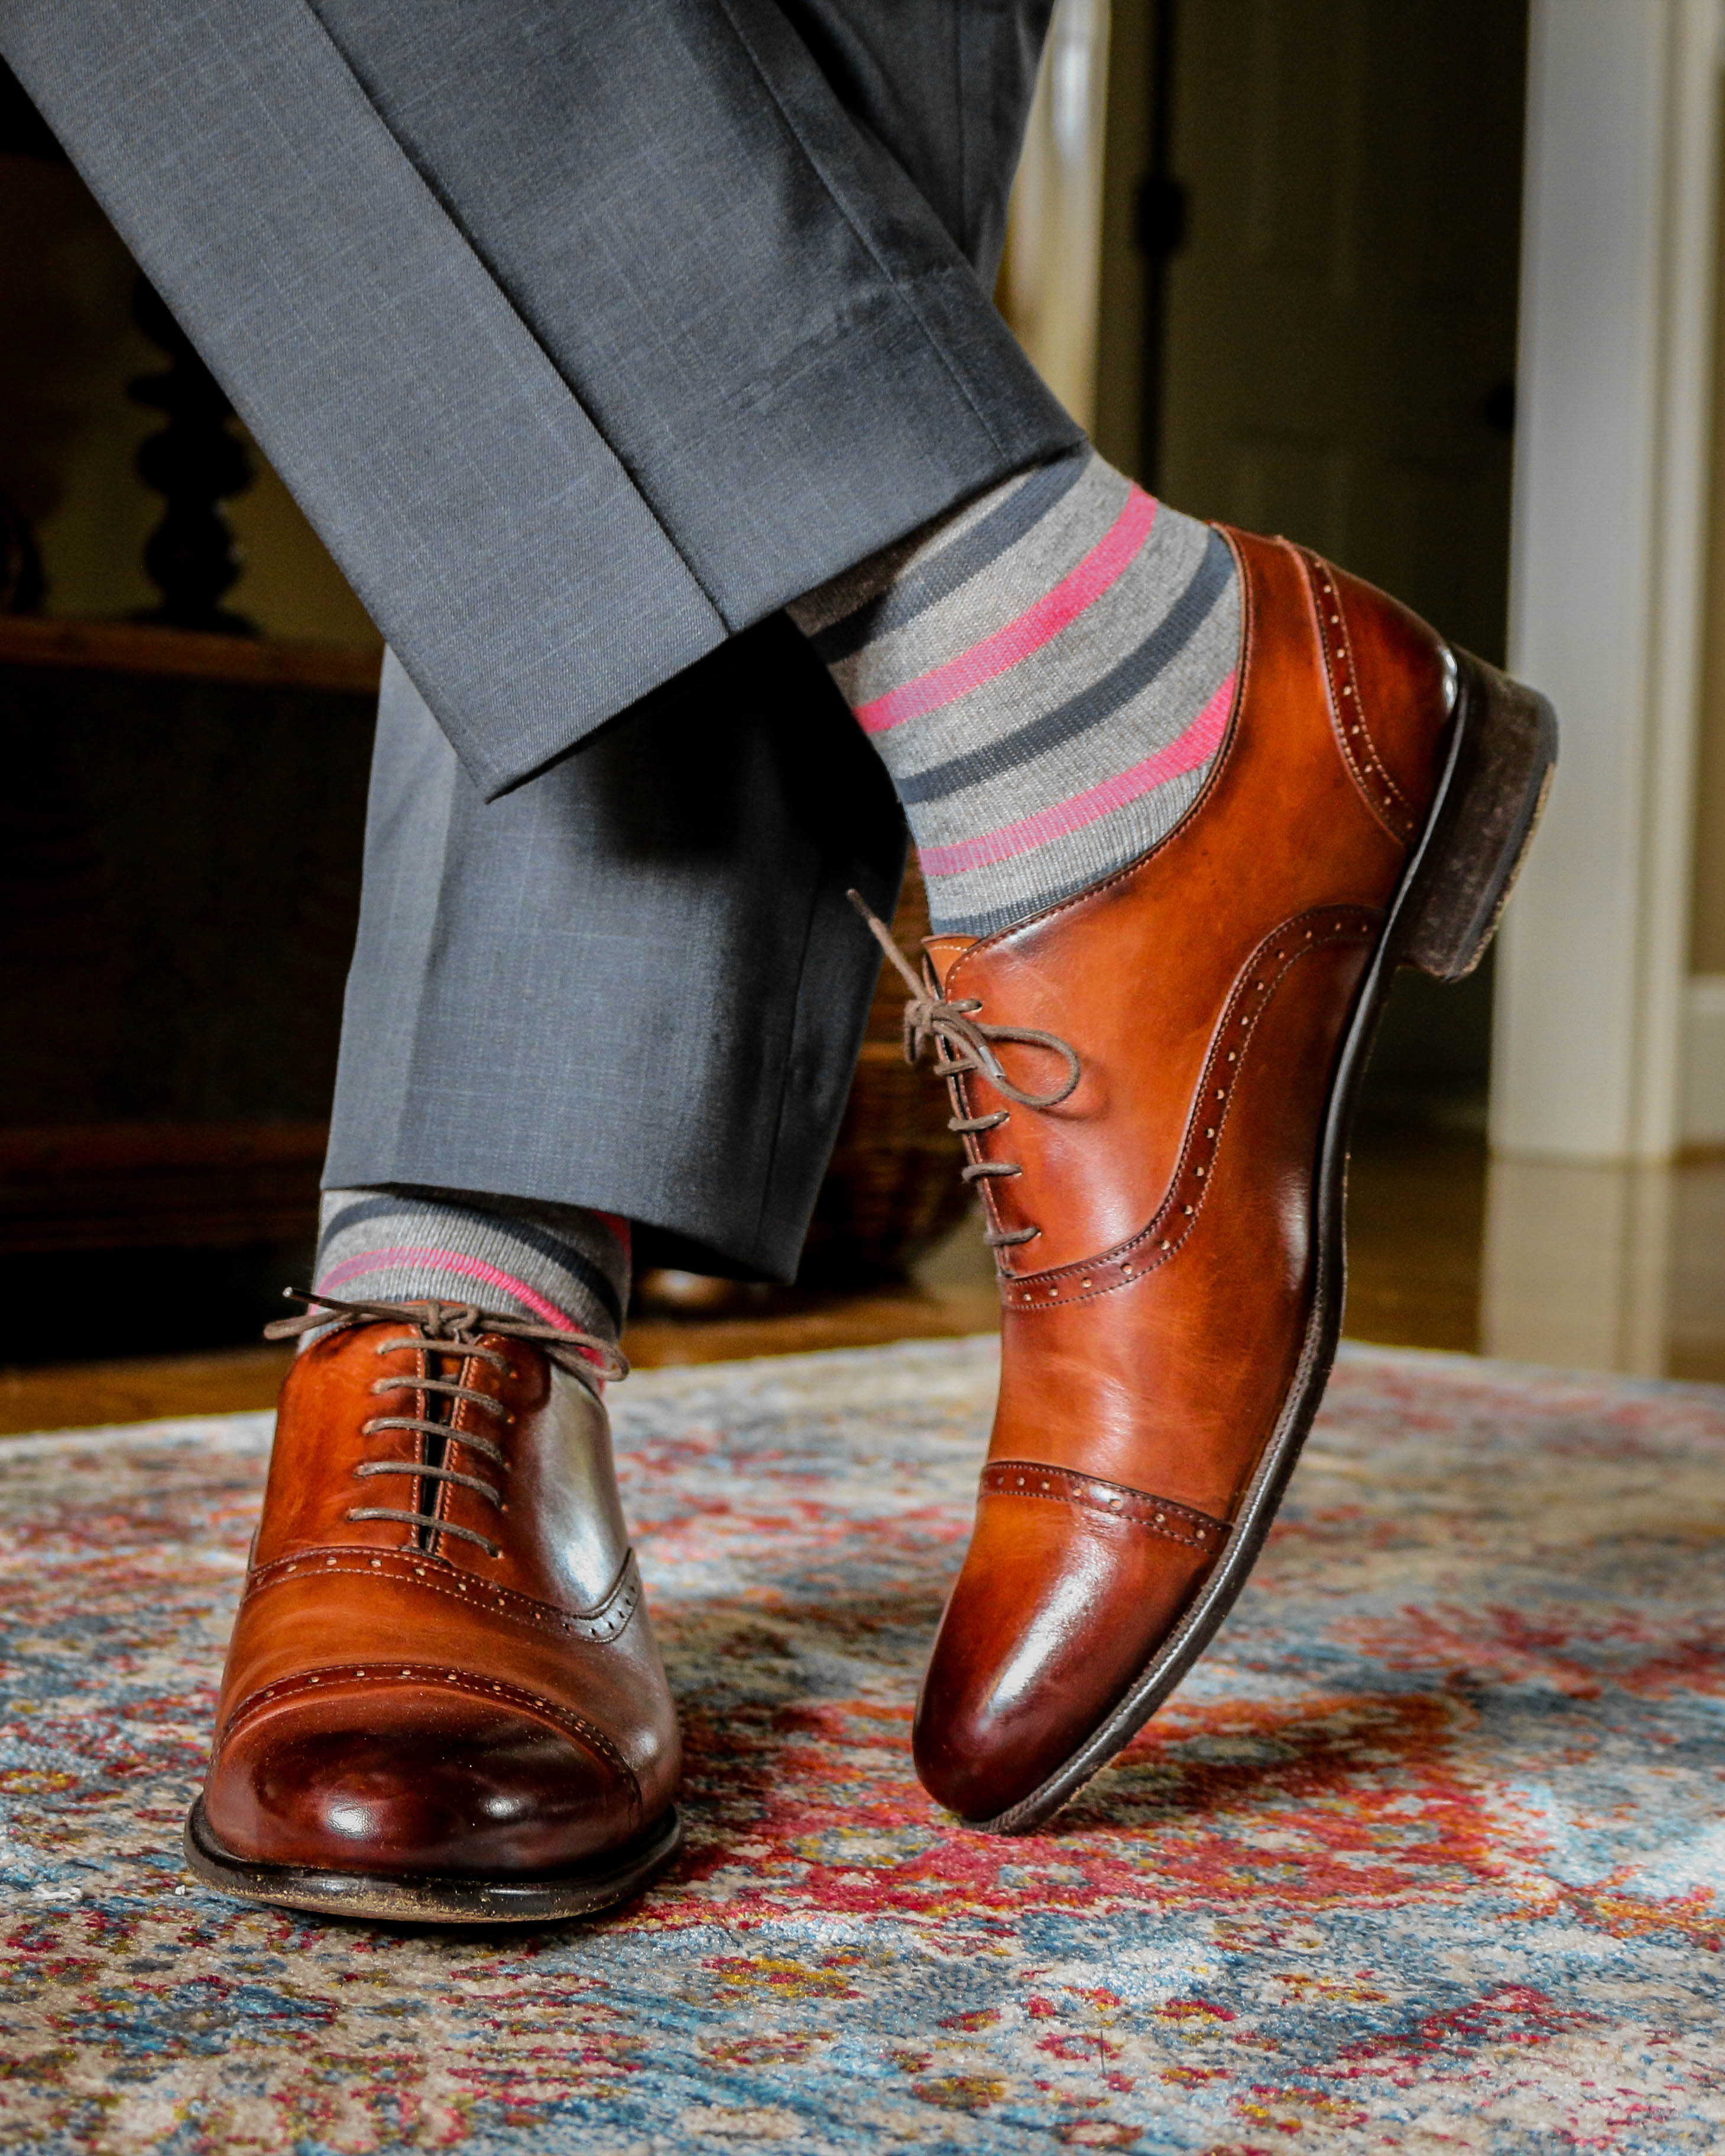 light grey over the calf dress socks with pink and grey stripes, brown dress shoes, grey dress pants, on a carpet